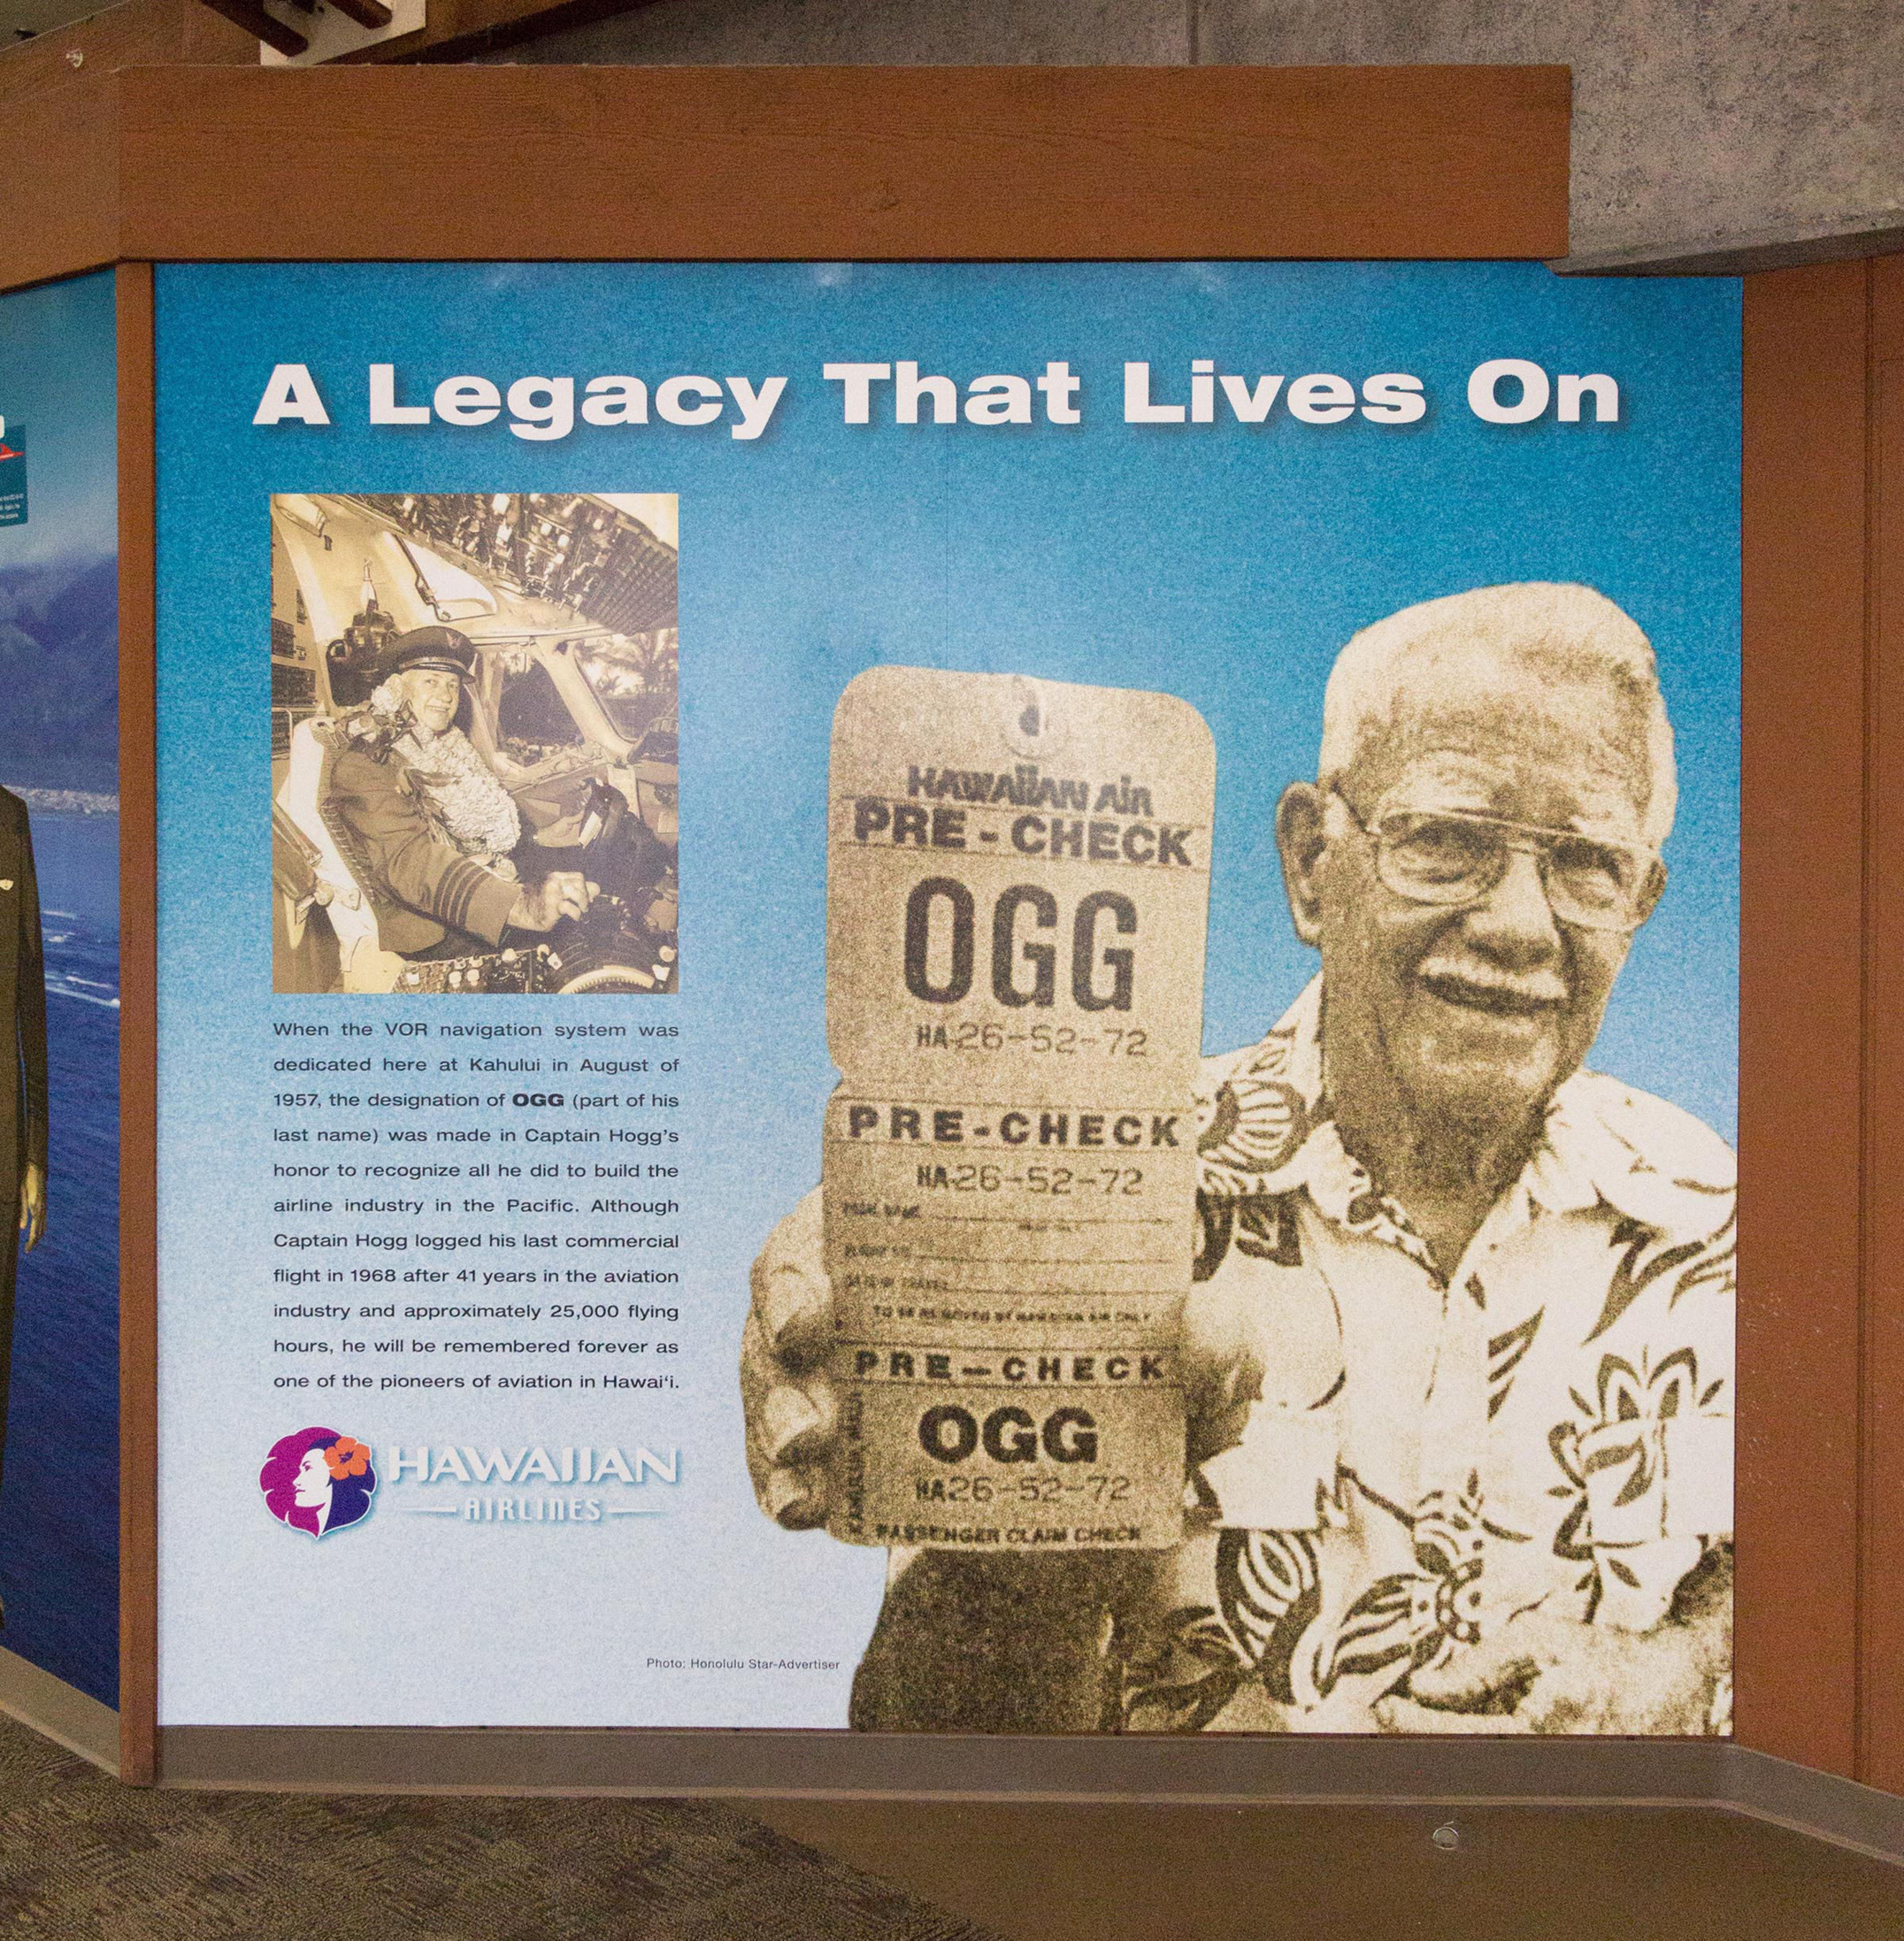 Travelers to Maui will no longer have to puzzle over why Kahului Airport's three-letter airport code is OGG. They need only spend a few minutes at a new wall paying tribute to Capt. Jimmy Hogg, the Hawaiian Airlines pilot and aviation pioneer for whom the airport is named. The 8-foot tall, 42-foot wide wall at Gate 19 was presented this morning by Hawaiian Airlines, the State Department of Transportation (DOT) and the Transportation Security Administration (TSA). (PRNewsFoto/Hawaiian Airlines) (PRNewsFoto/HAWAIIAN AIRLINES)